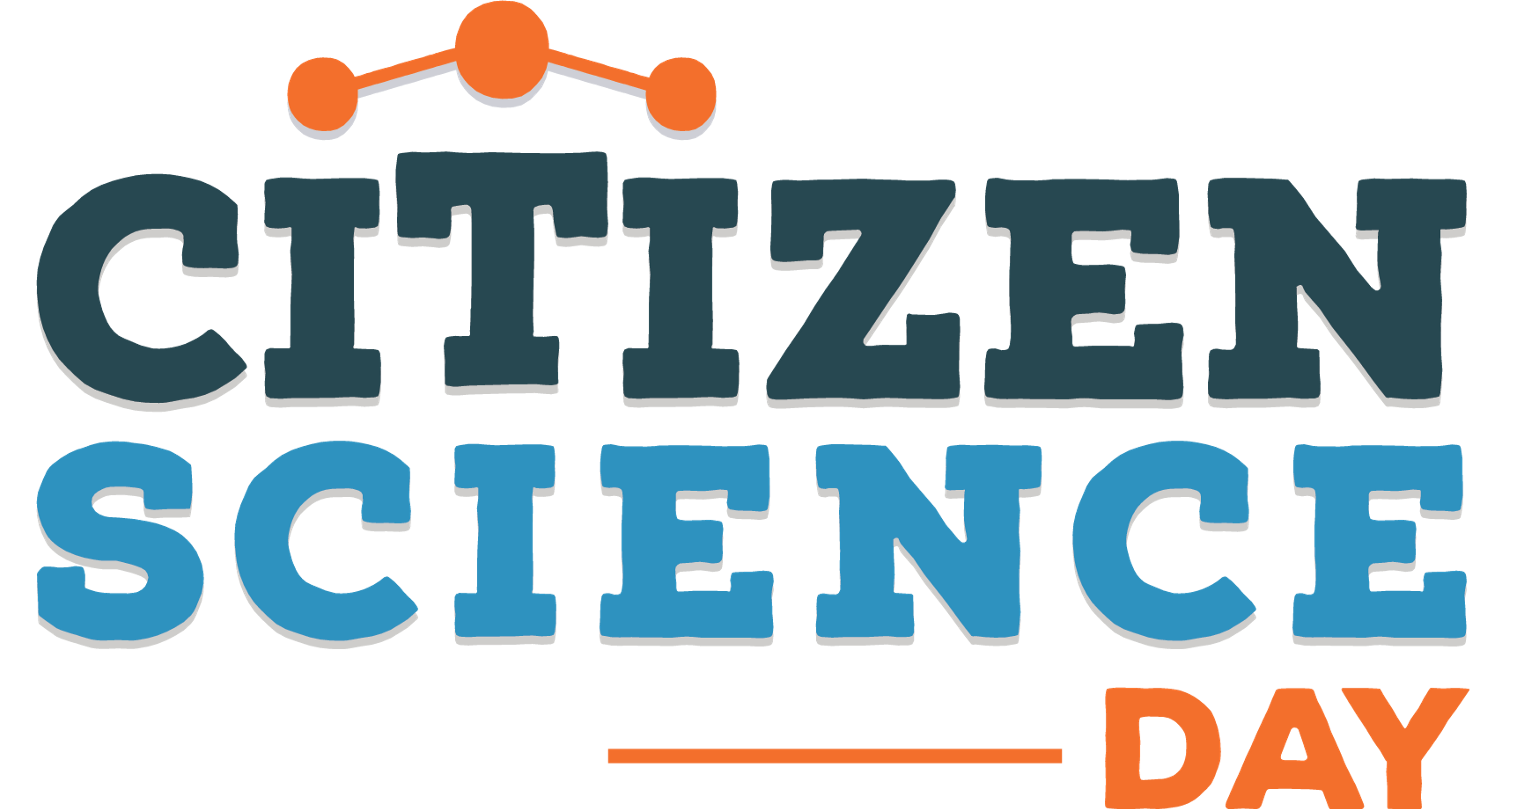 Happy Citizen Science Day!